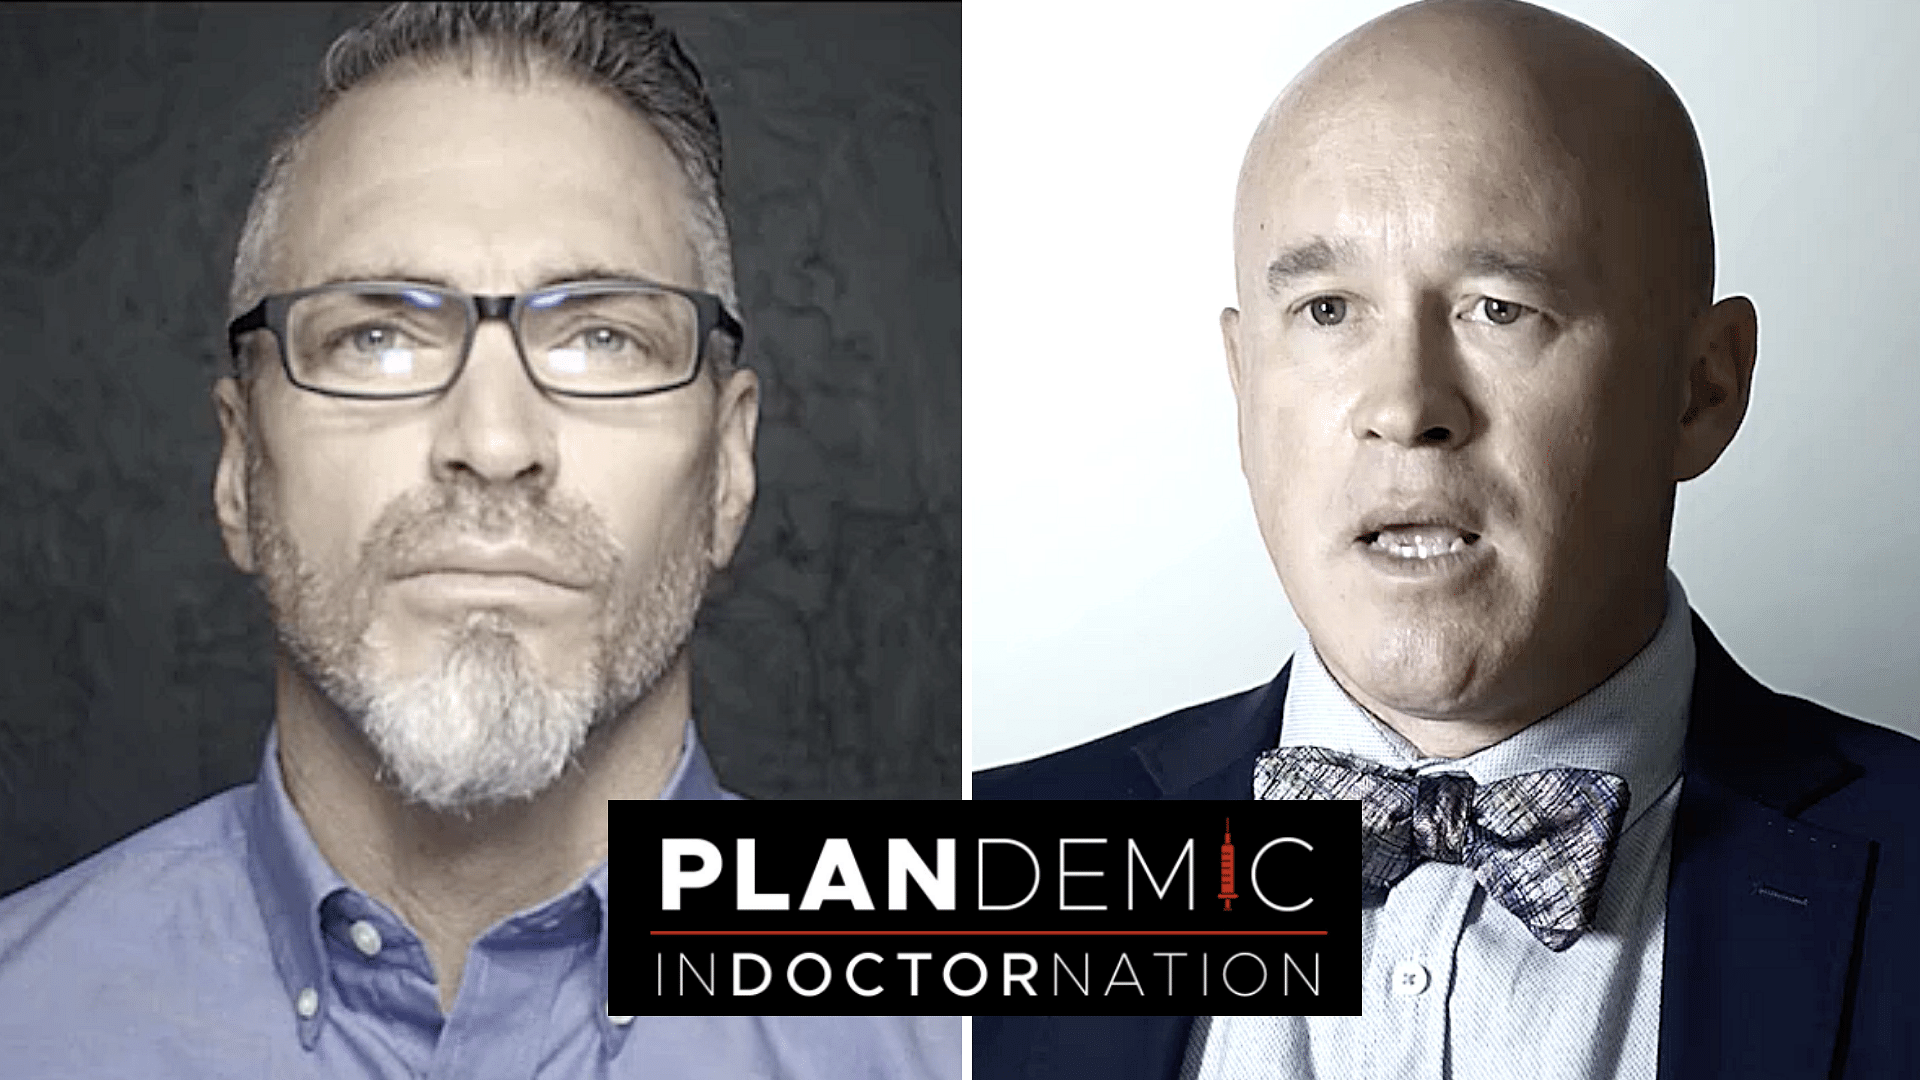 ‘Plandemic 2: Indoctornation’ is a 75-minute-long sequel to the wildly viral ‘Plandemic’ that released in May 2020.